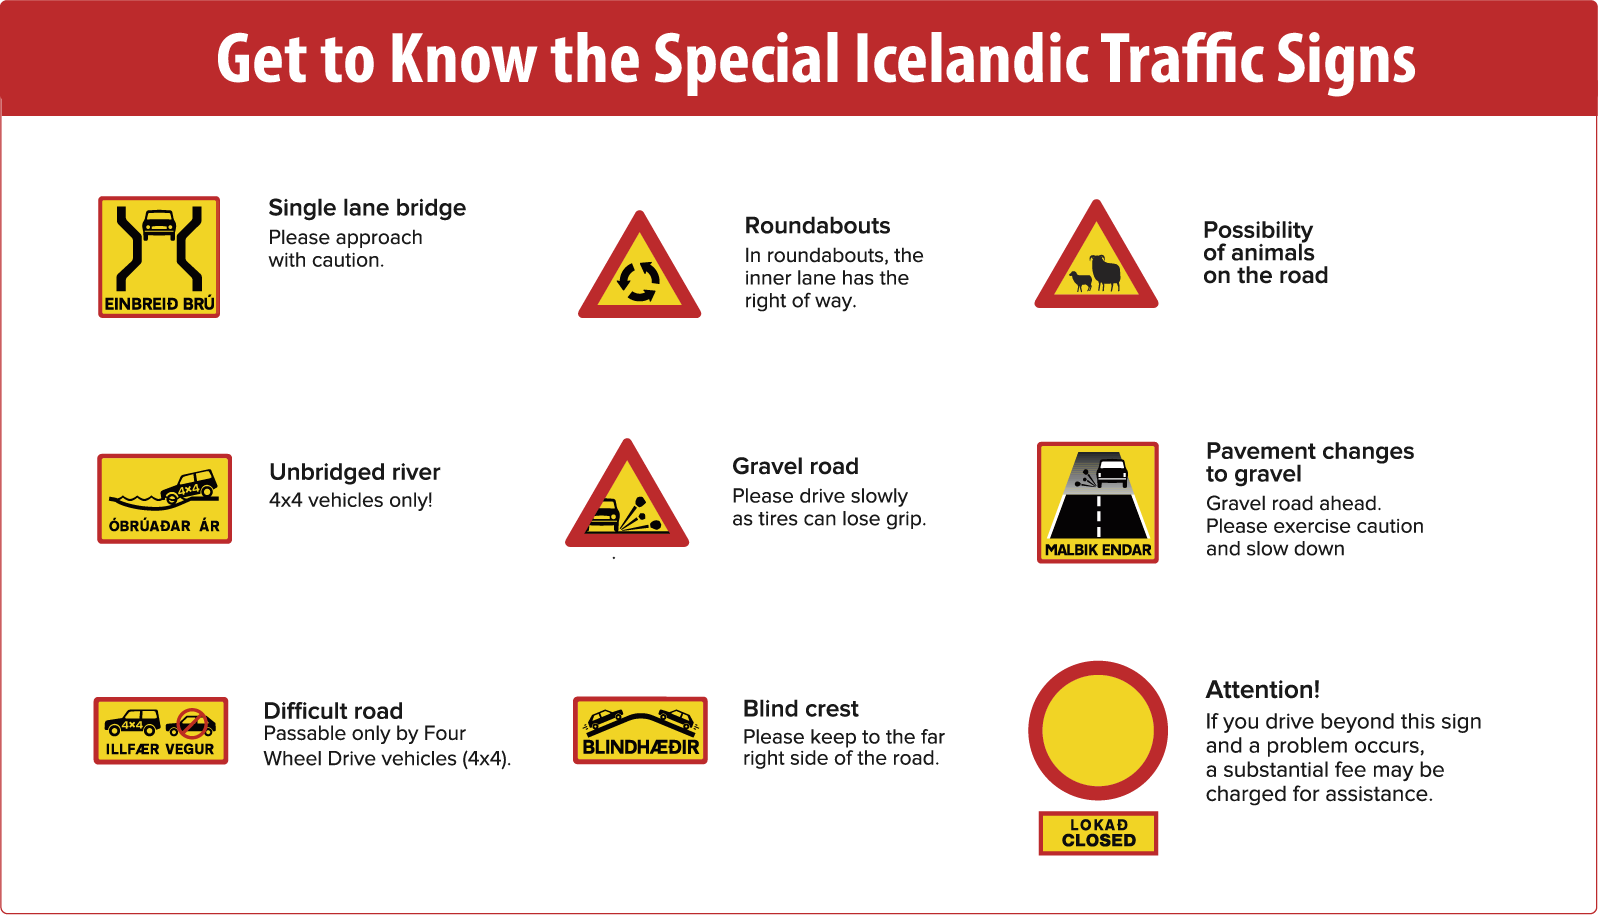 Image showing all special Icelandic traffic signs